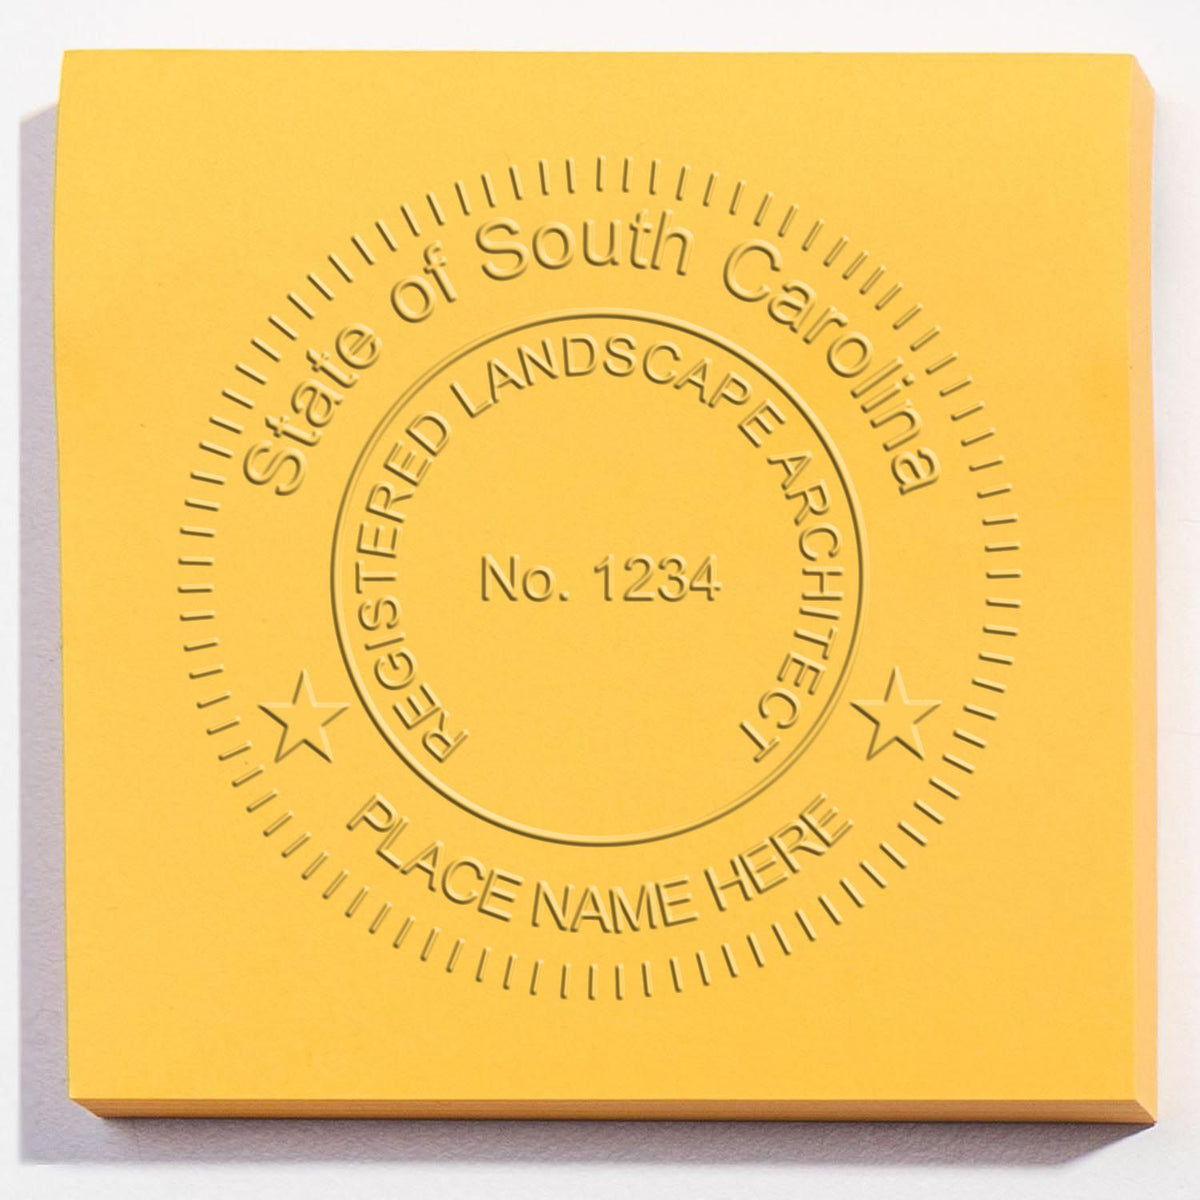 A photograph of the Hybrid South Carolina Landscape Architect Seal stamp impression reveals a vivid, professional image of the on paper.